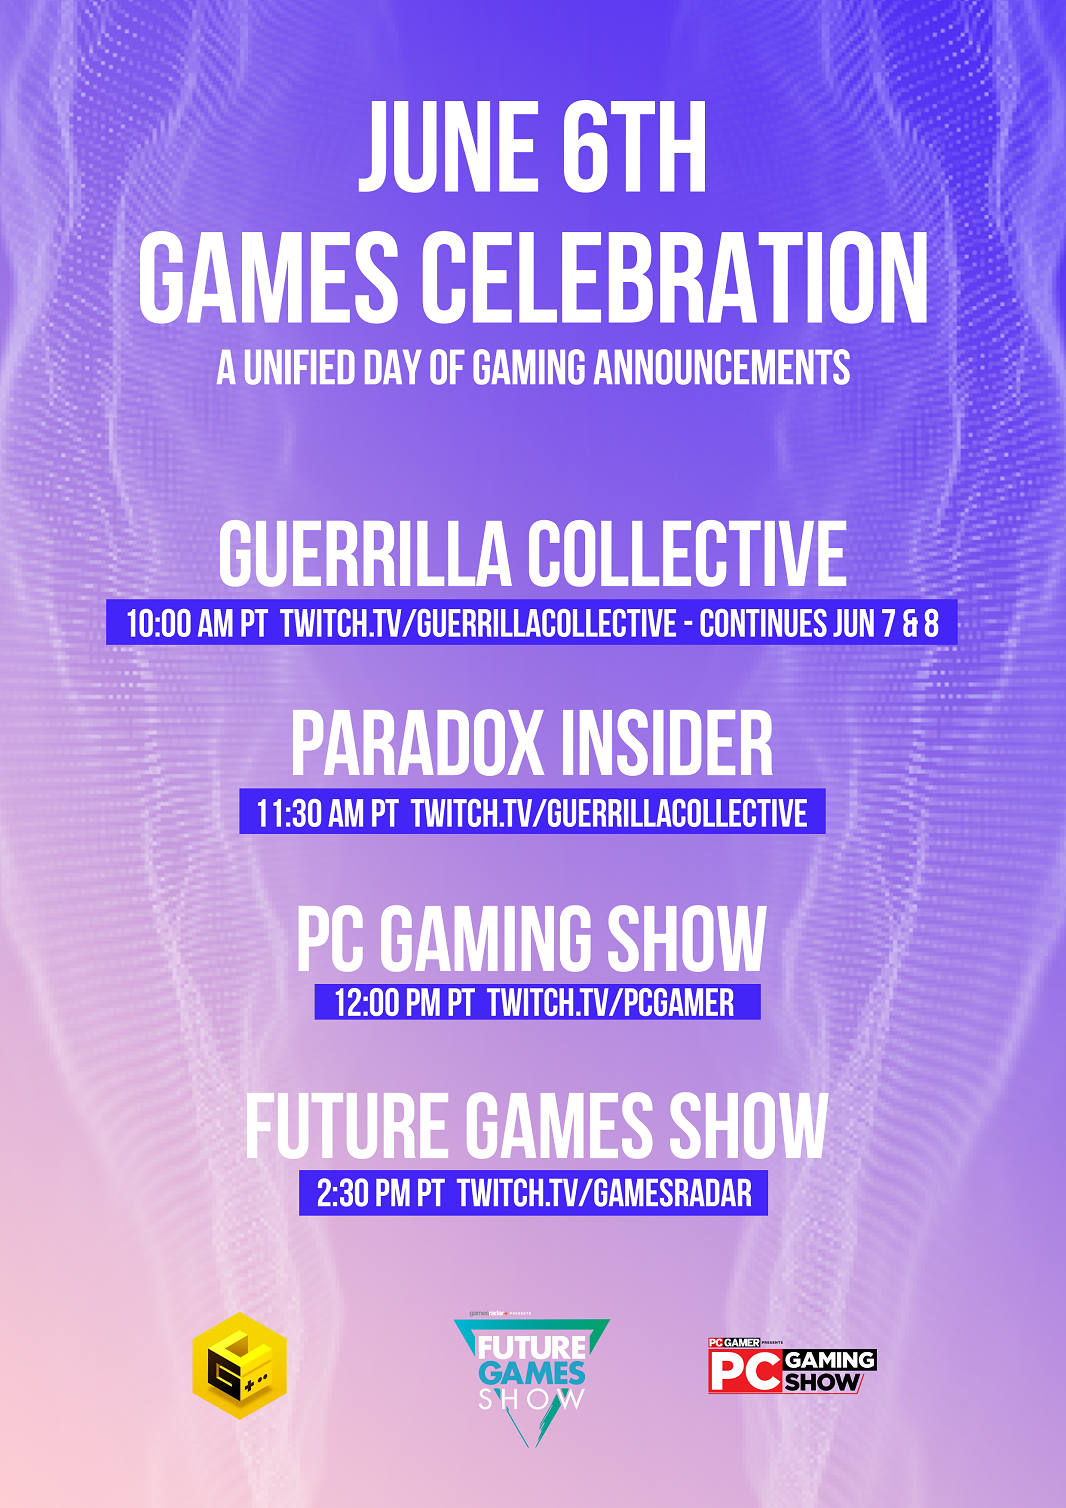 GUERRILLA COLLECTIVE  New Video Game Event to Air on Twitch June 6-8